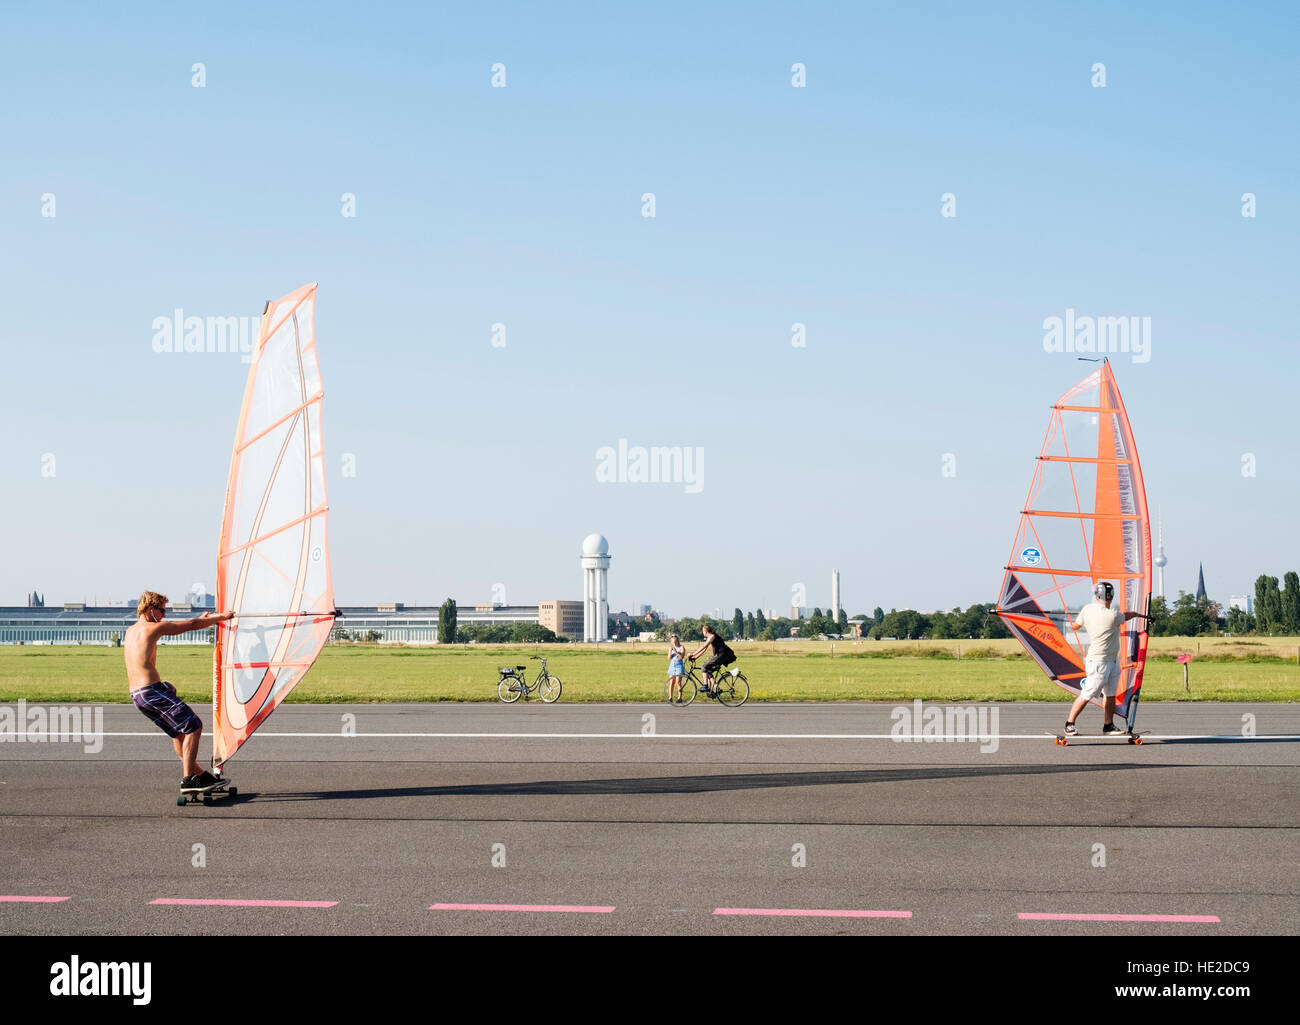 Land surfing at Tempelhof Park former airport in Berlin Germany Stock Photo